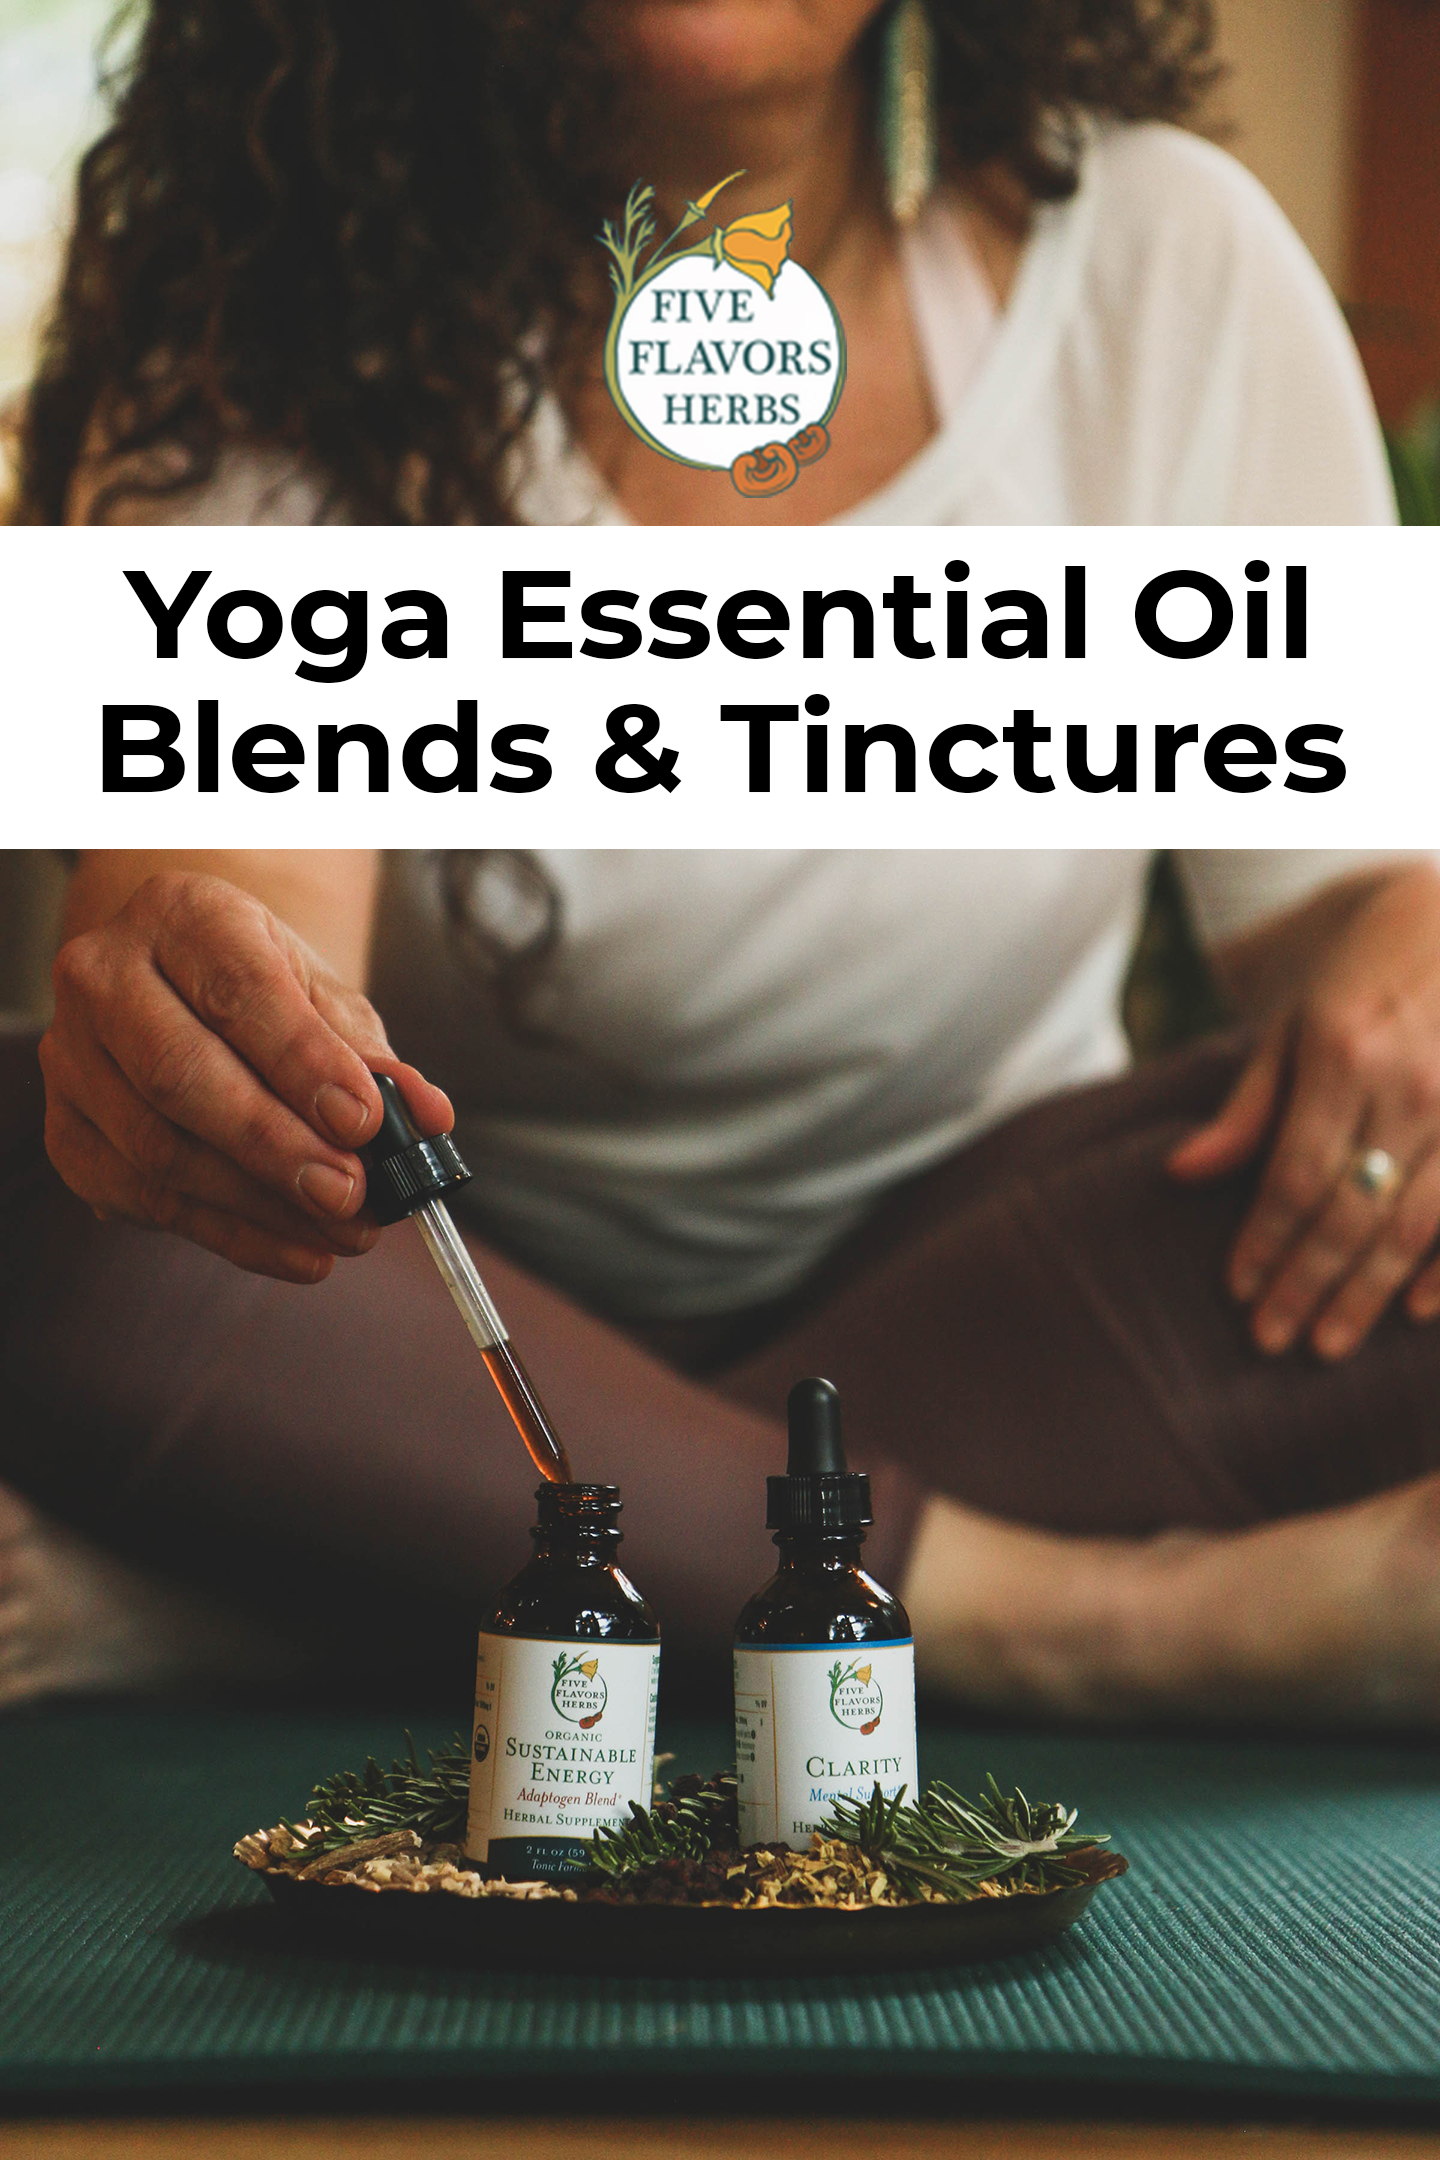 herbs-and-essential-oils-for-yoga-pin-five-flavors-herbs